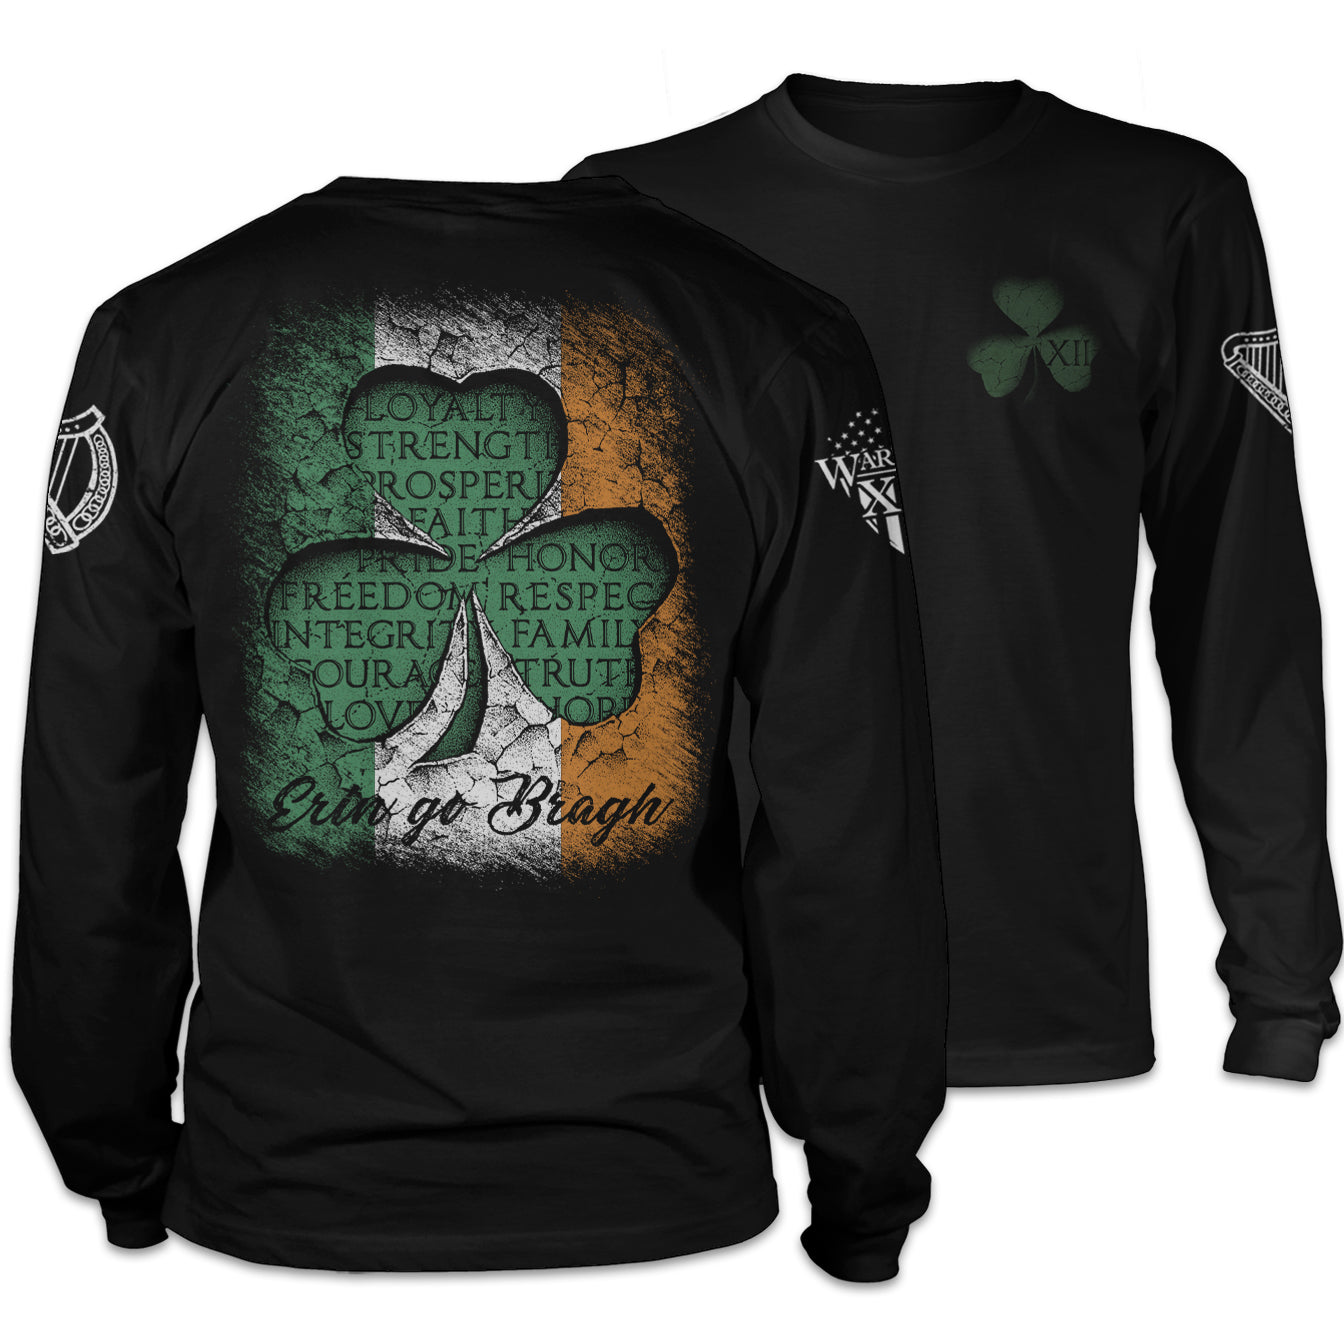 Front and back black long sleeve shirt with the words "Erin Go Bragh" which means means "Ireland until the end of time" or "Ireland Forever" in the Irish language as well as a a clover with the Irish Flag inside of it printed on the shirt.